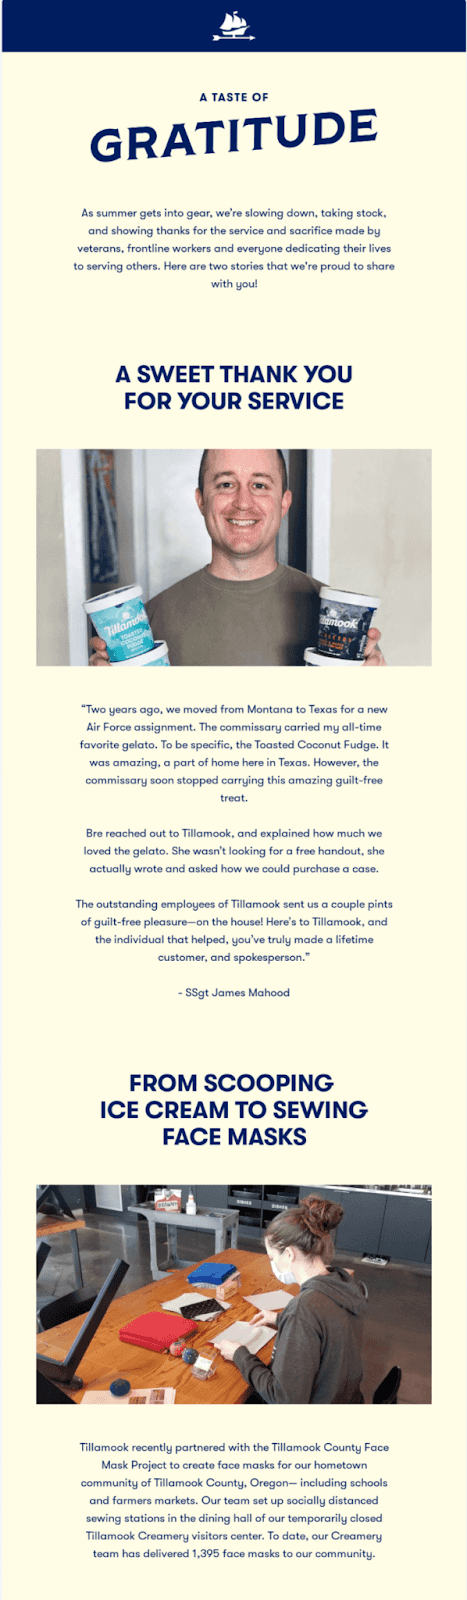 This email shows a small business Saturday idea in action. It is an email that thanks customers for their loyalty and shows the ice cream brand's dedication to the community. 